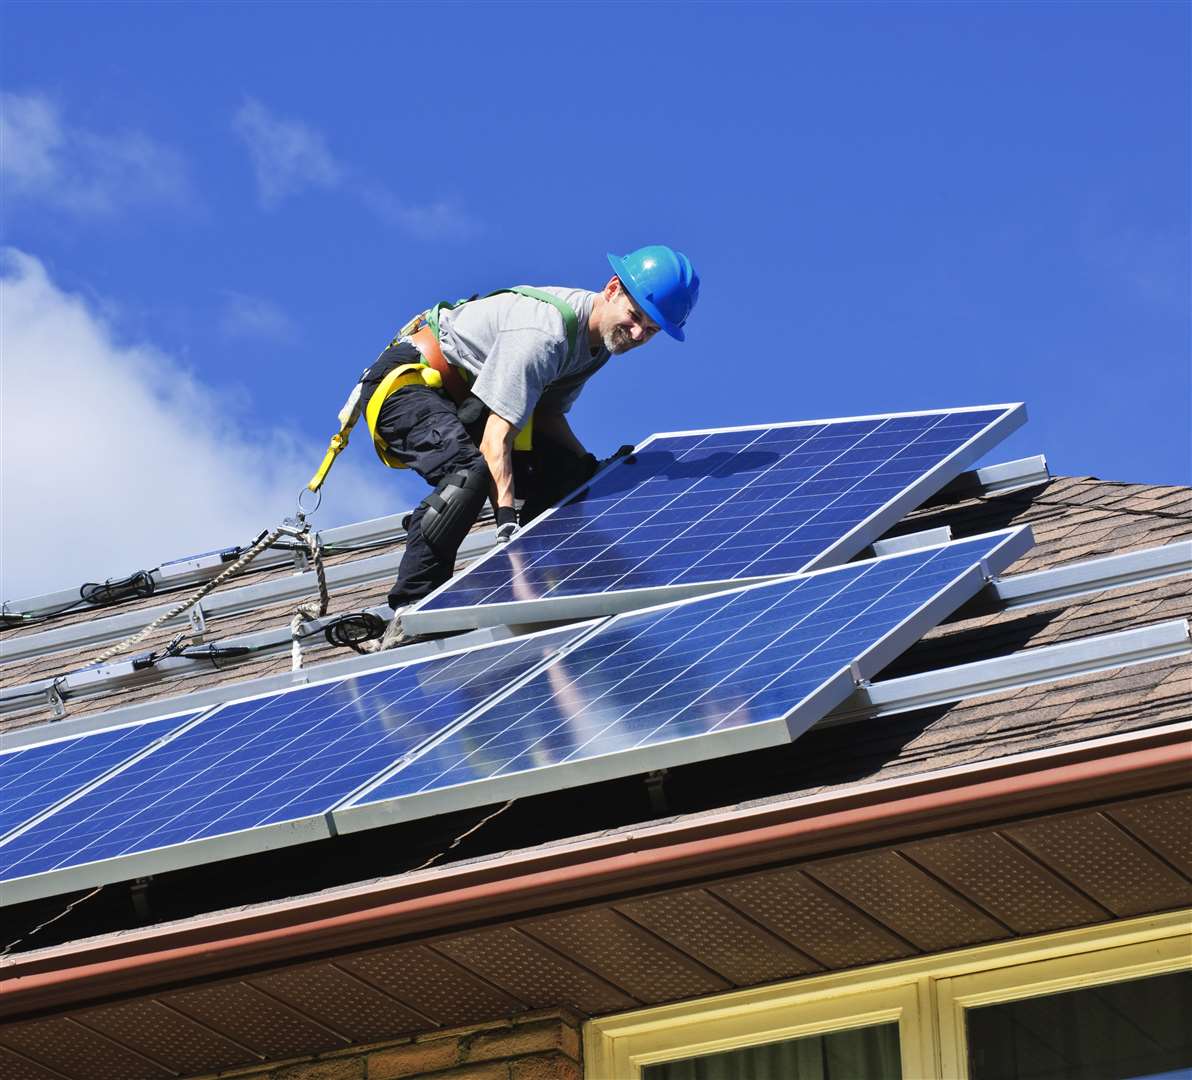 Mears Group, in partnership with Aberdeenshire Council, has been installing solar panels on social housing.